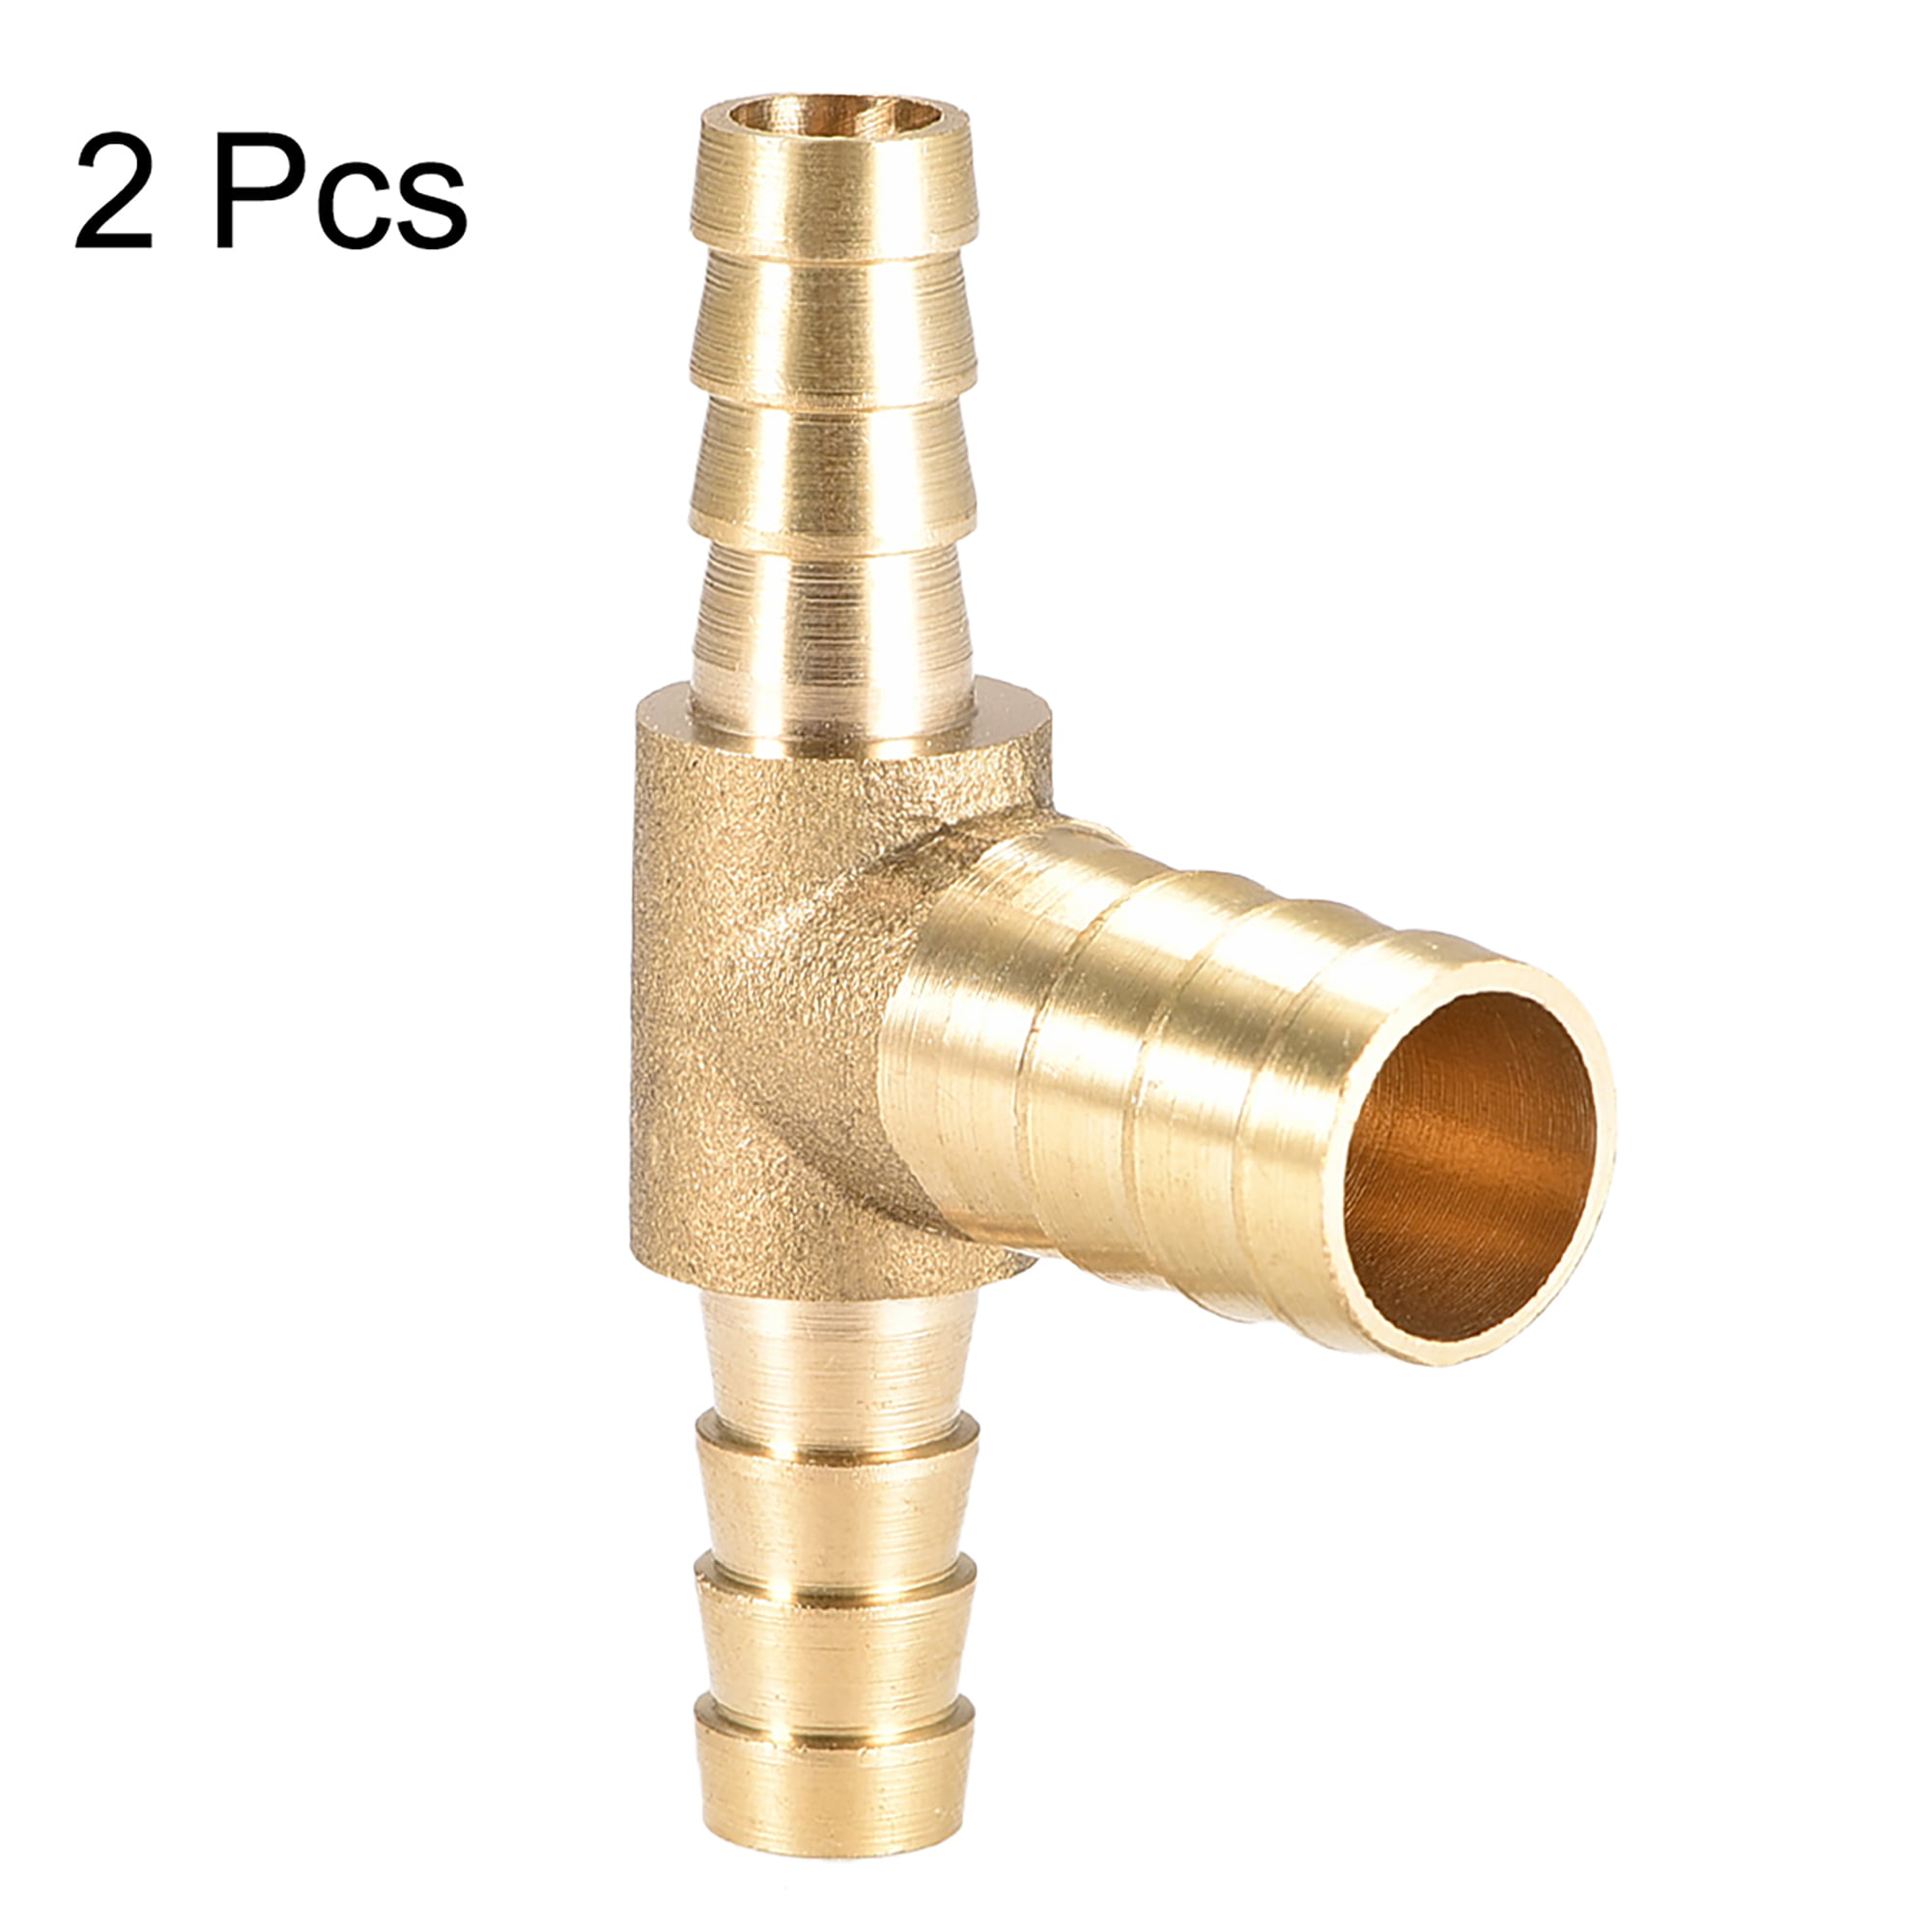 Cross Shaped 4 Way 12mm Dia Barb Hose Connector Quick Fitting 2pcs 